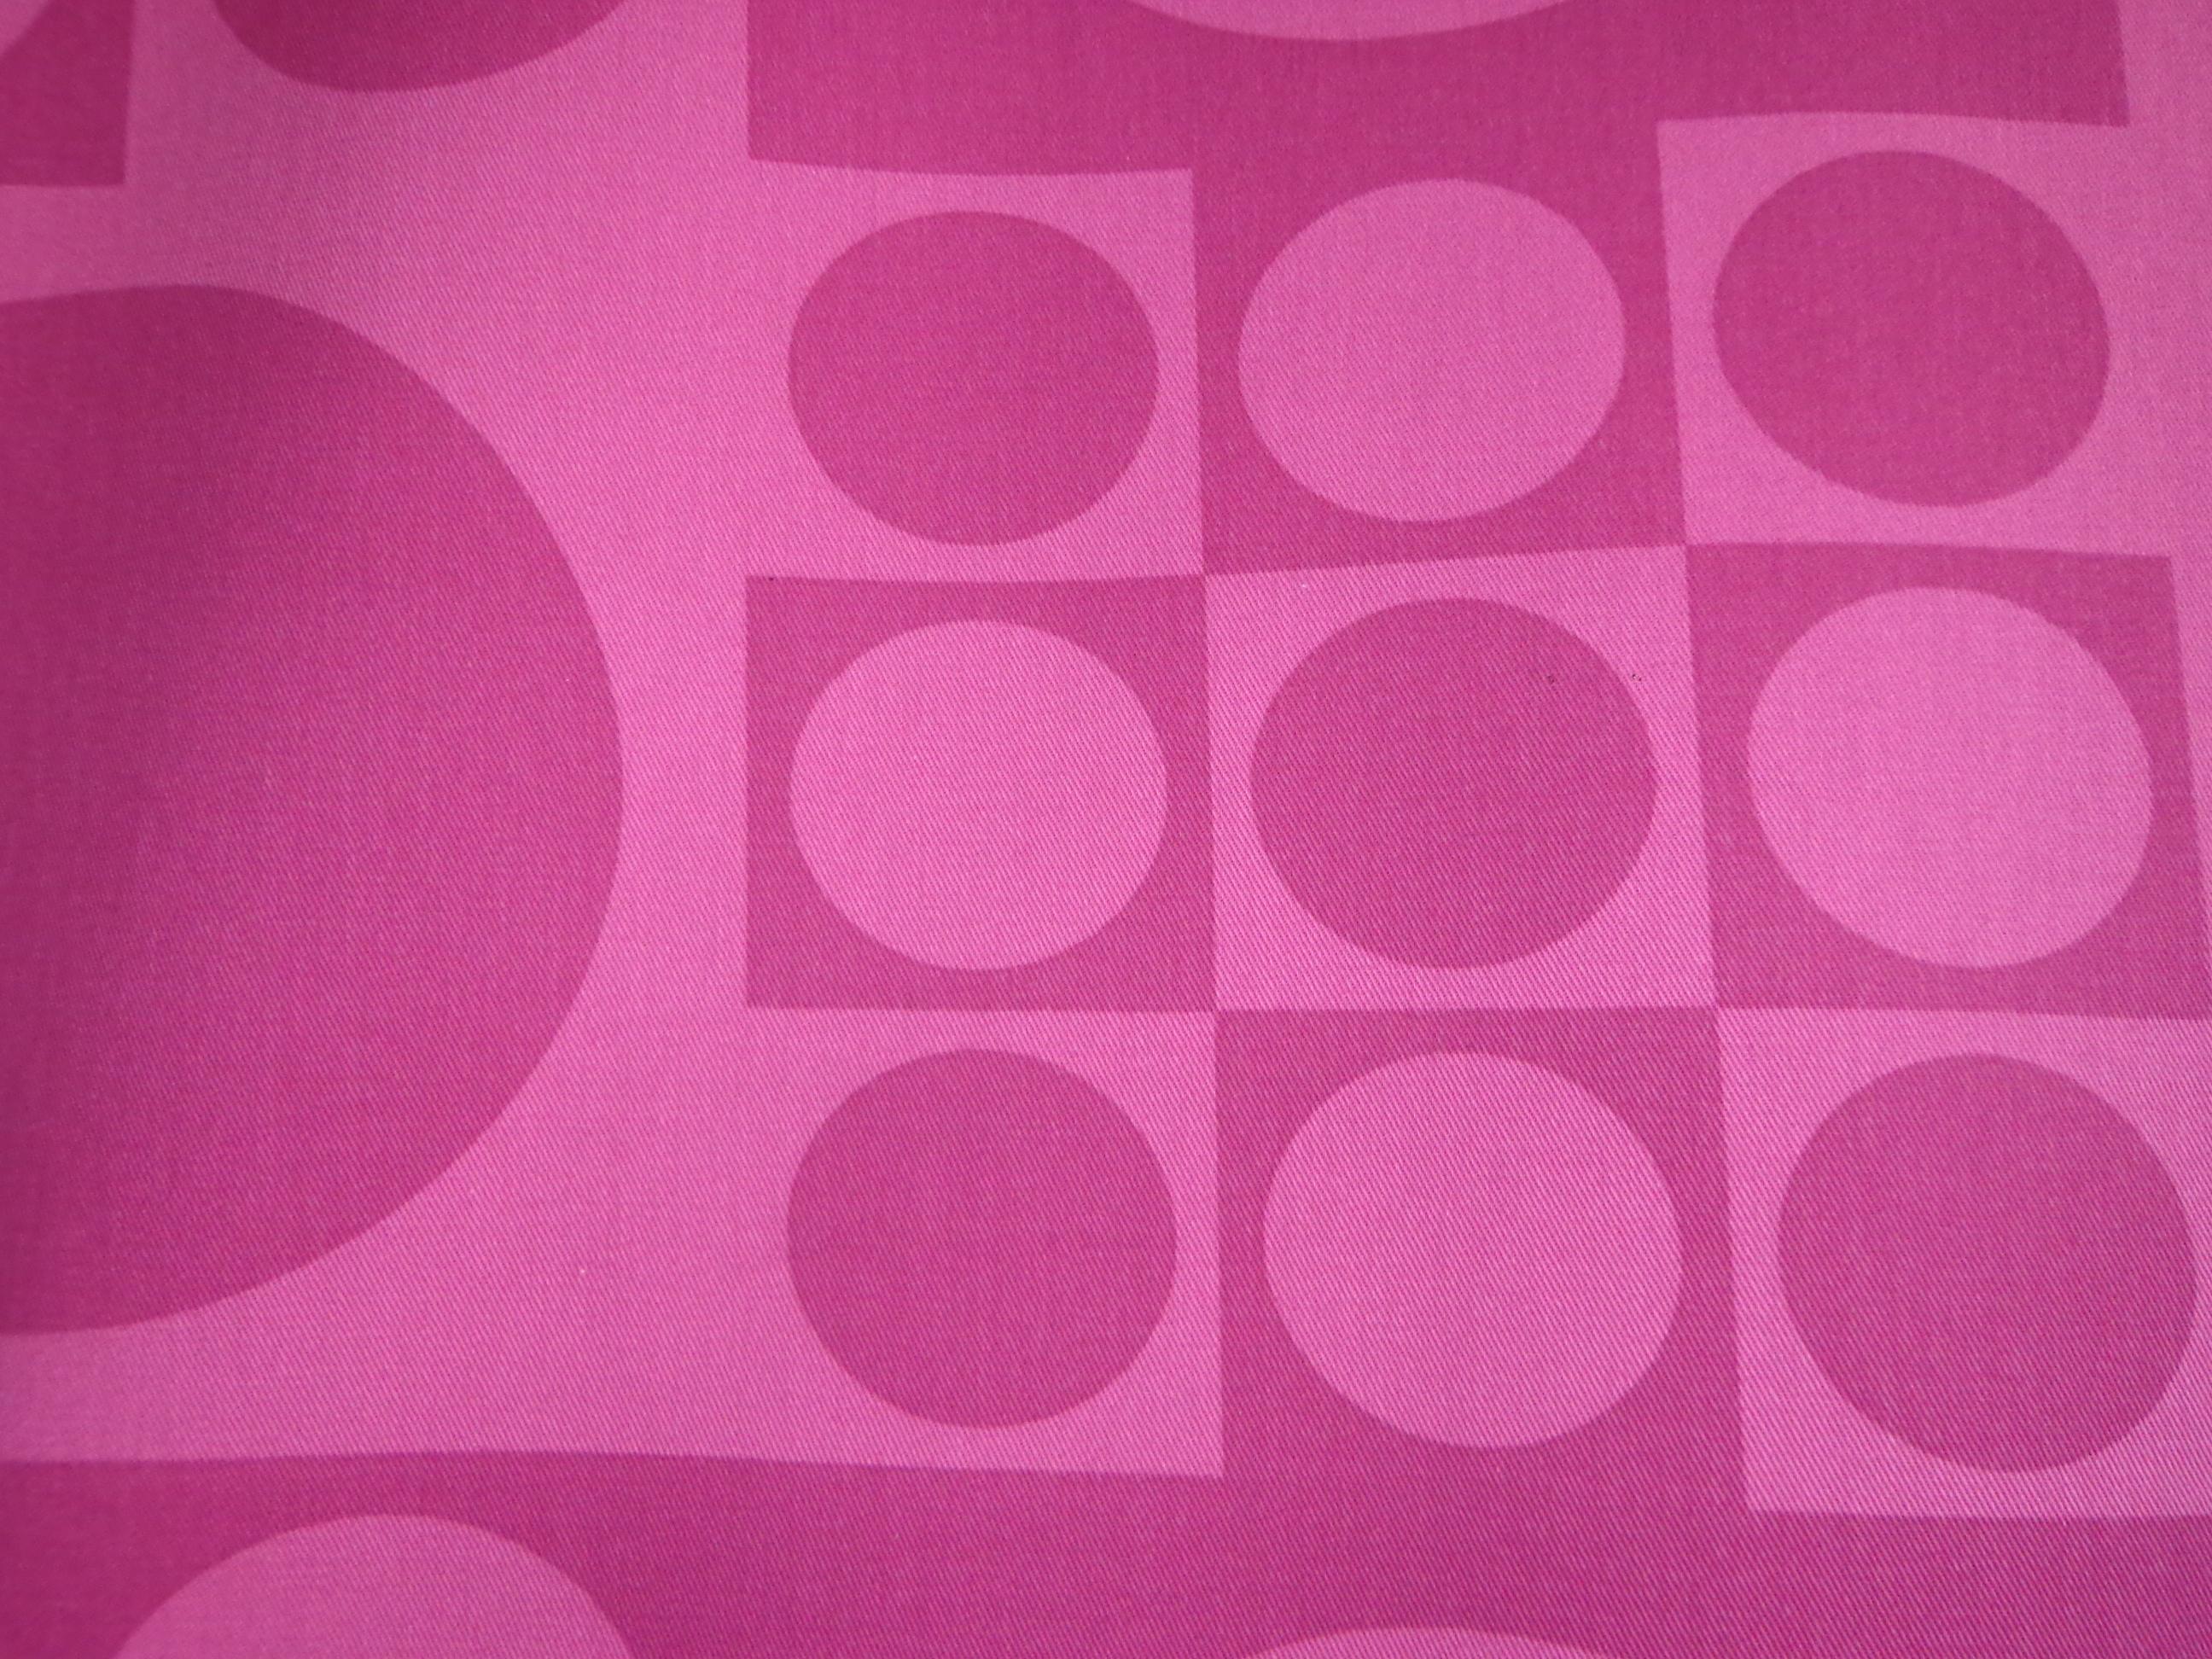 This cool geometry 1 design was also used by Verner Panton for carpets and curtains and was given the Design Award A.I.D. 1963, USA.

Designed 1961

Materials: Cotton, Geometric printed
Manufacturer: Unika Væv.